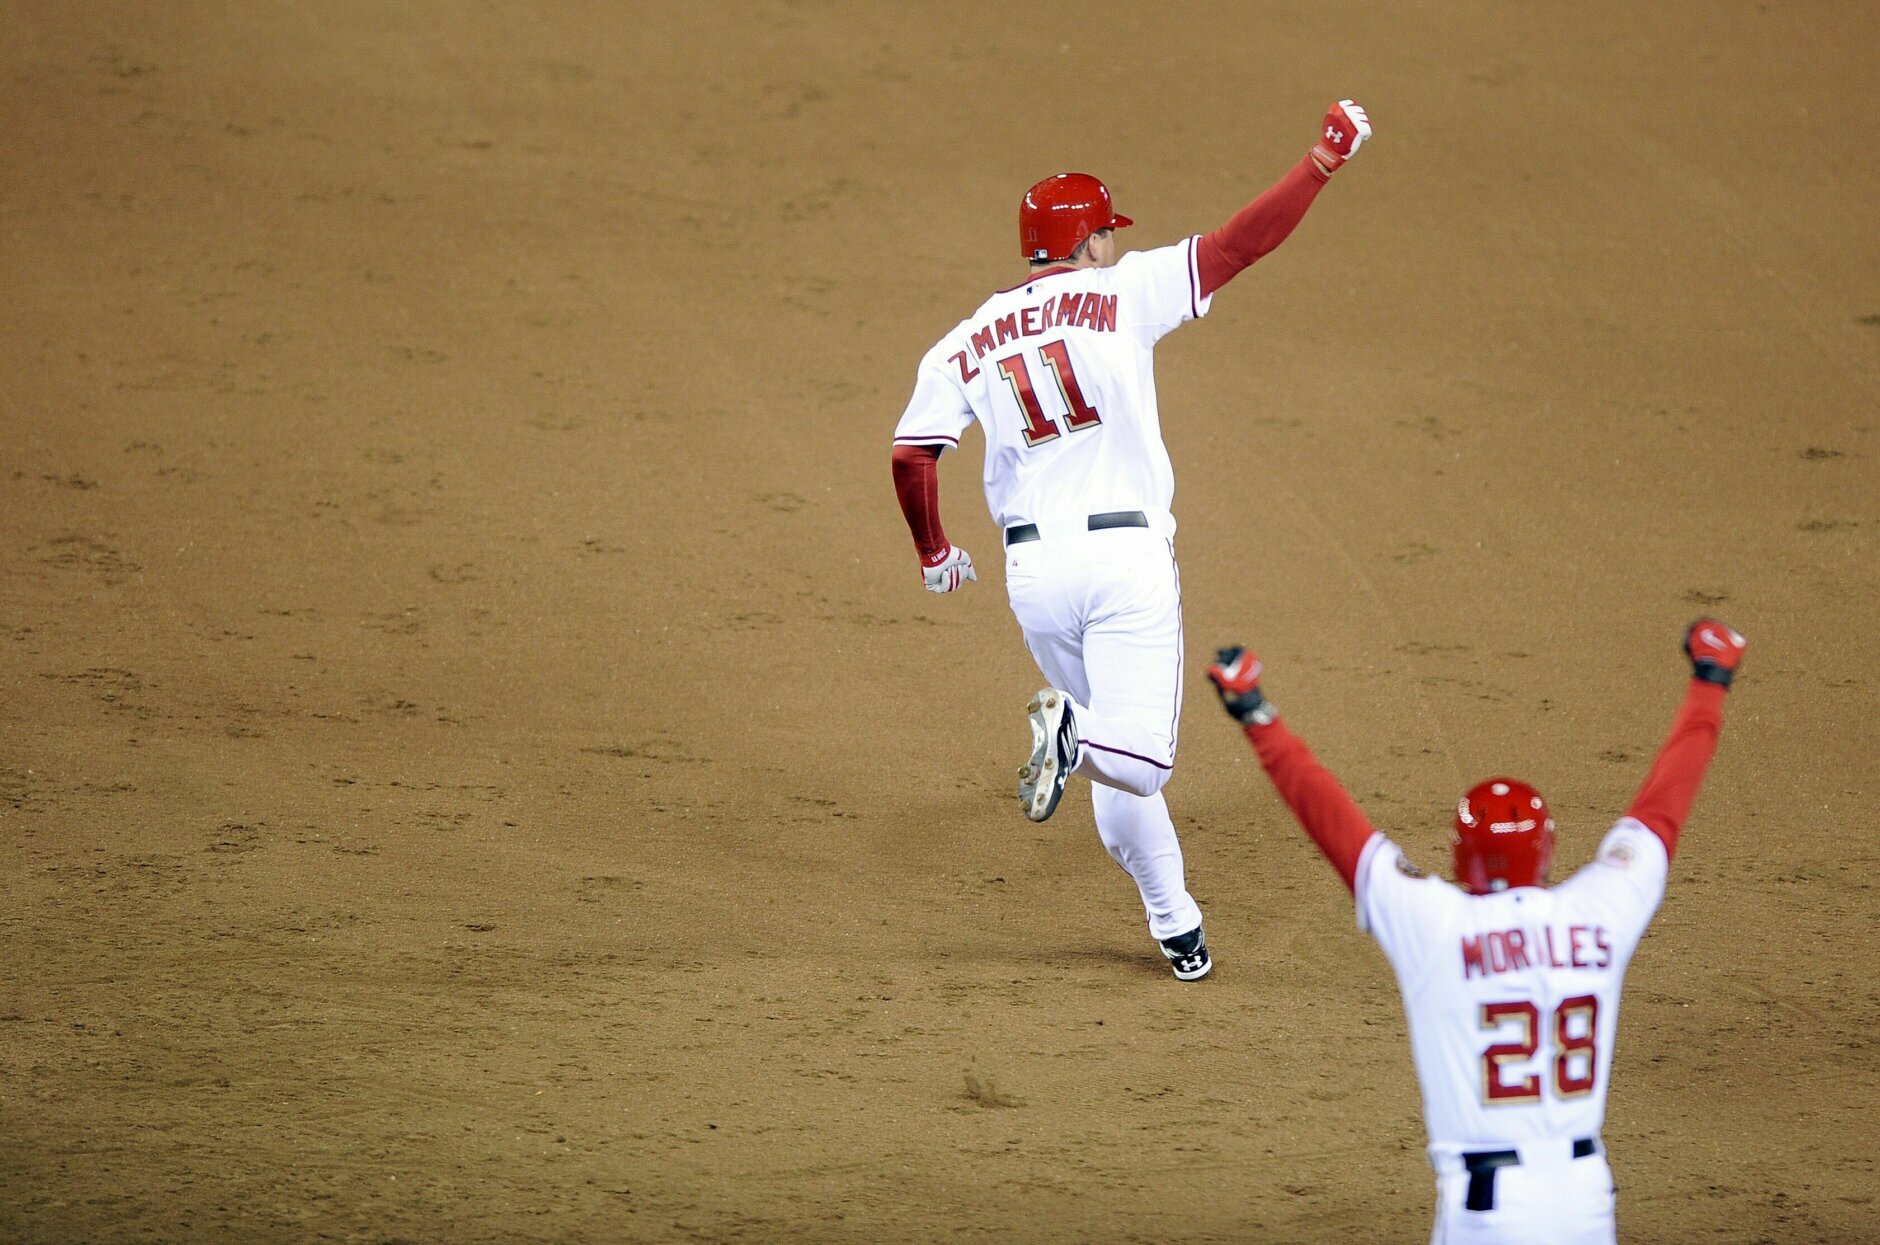 WASHINGTON - MARCH 30:  Ryan Zimmerman #11 of the Washington Nationals rounds the bases after hitting the game winning home-run in the bottom of the 9th inning against the Atlanta Braves on opening day on March 30, 2008 at Nationals Park in Washington, D.C. The Nationals won 3-2. (Photo by G Fiume/Getty Images)